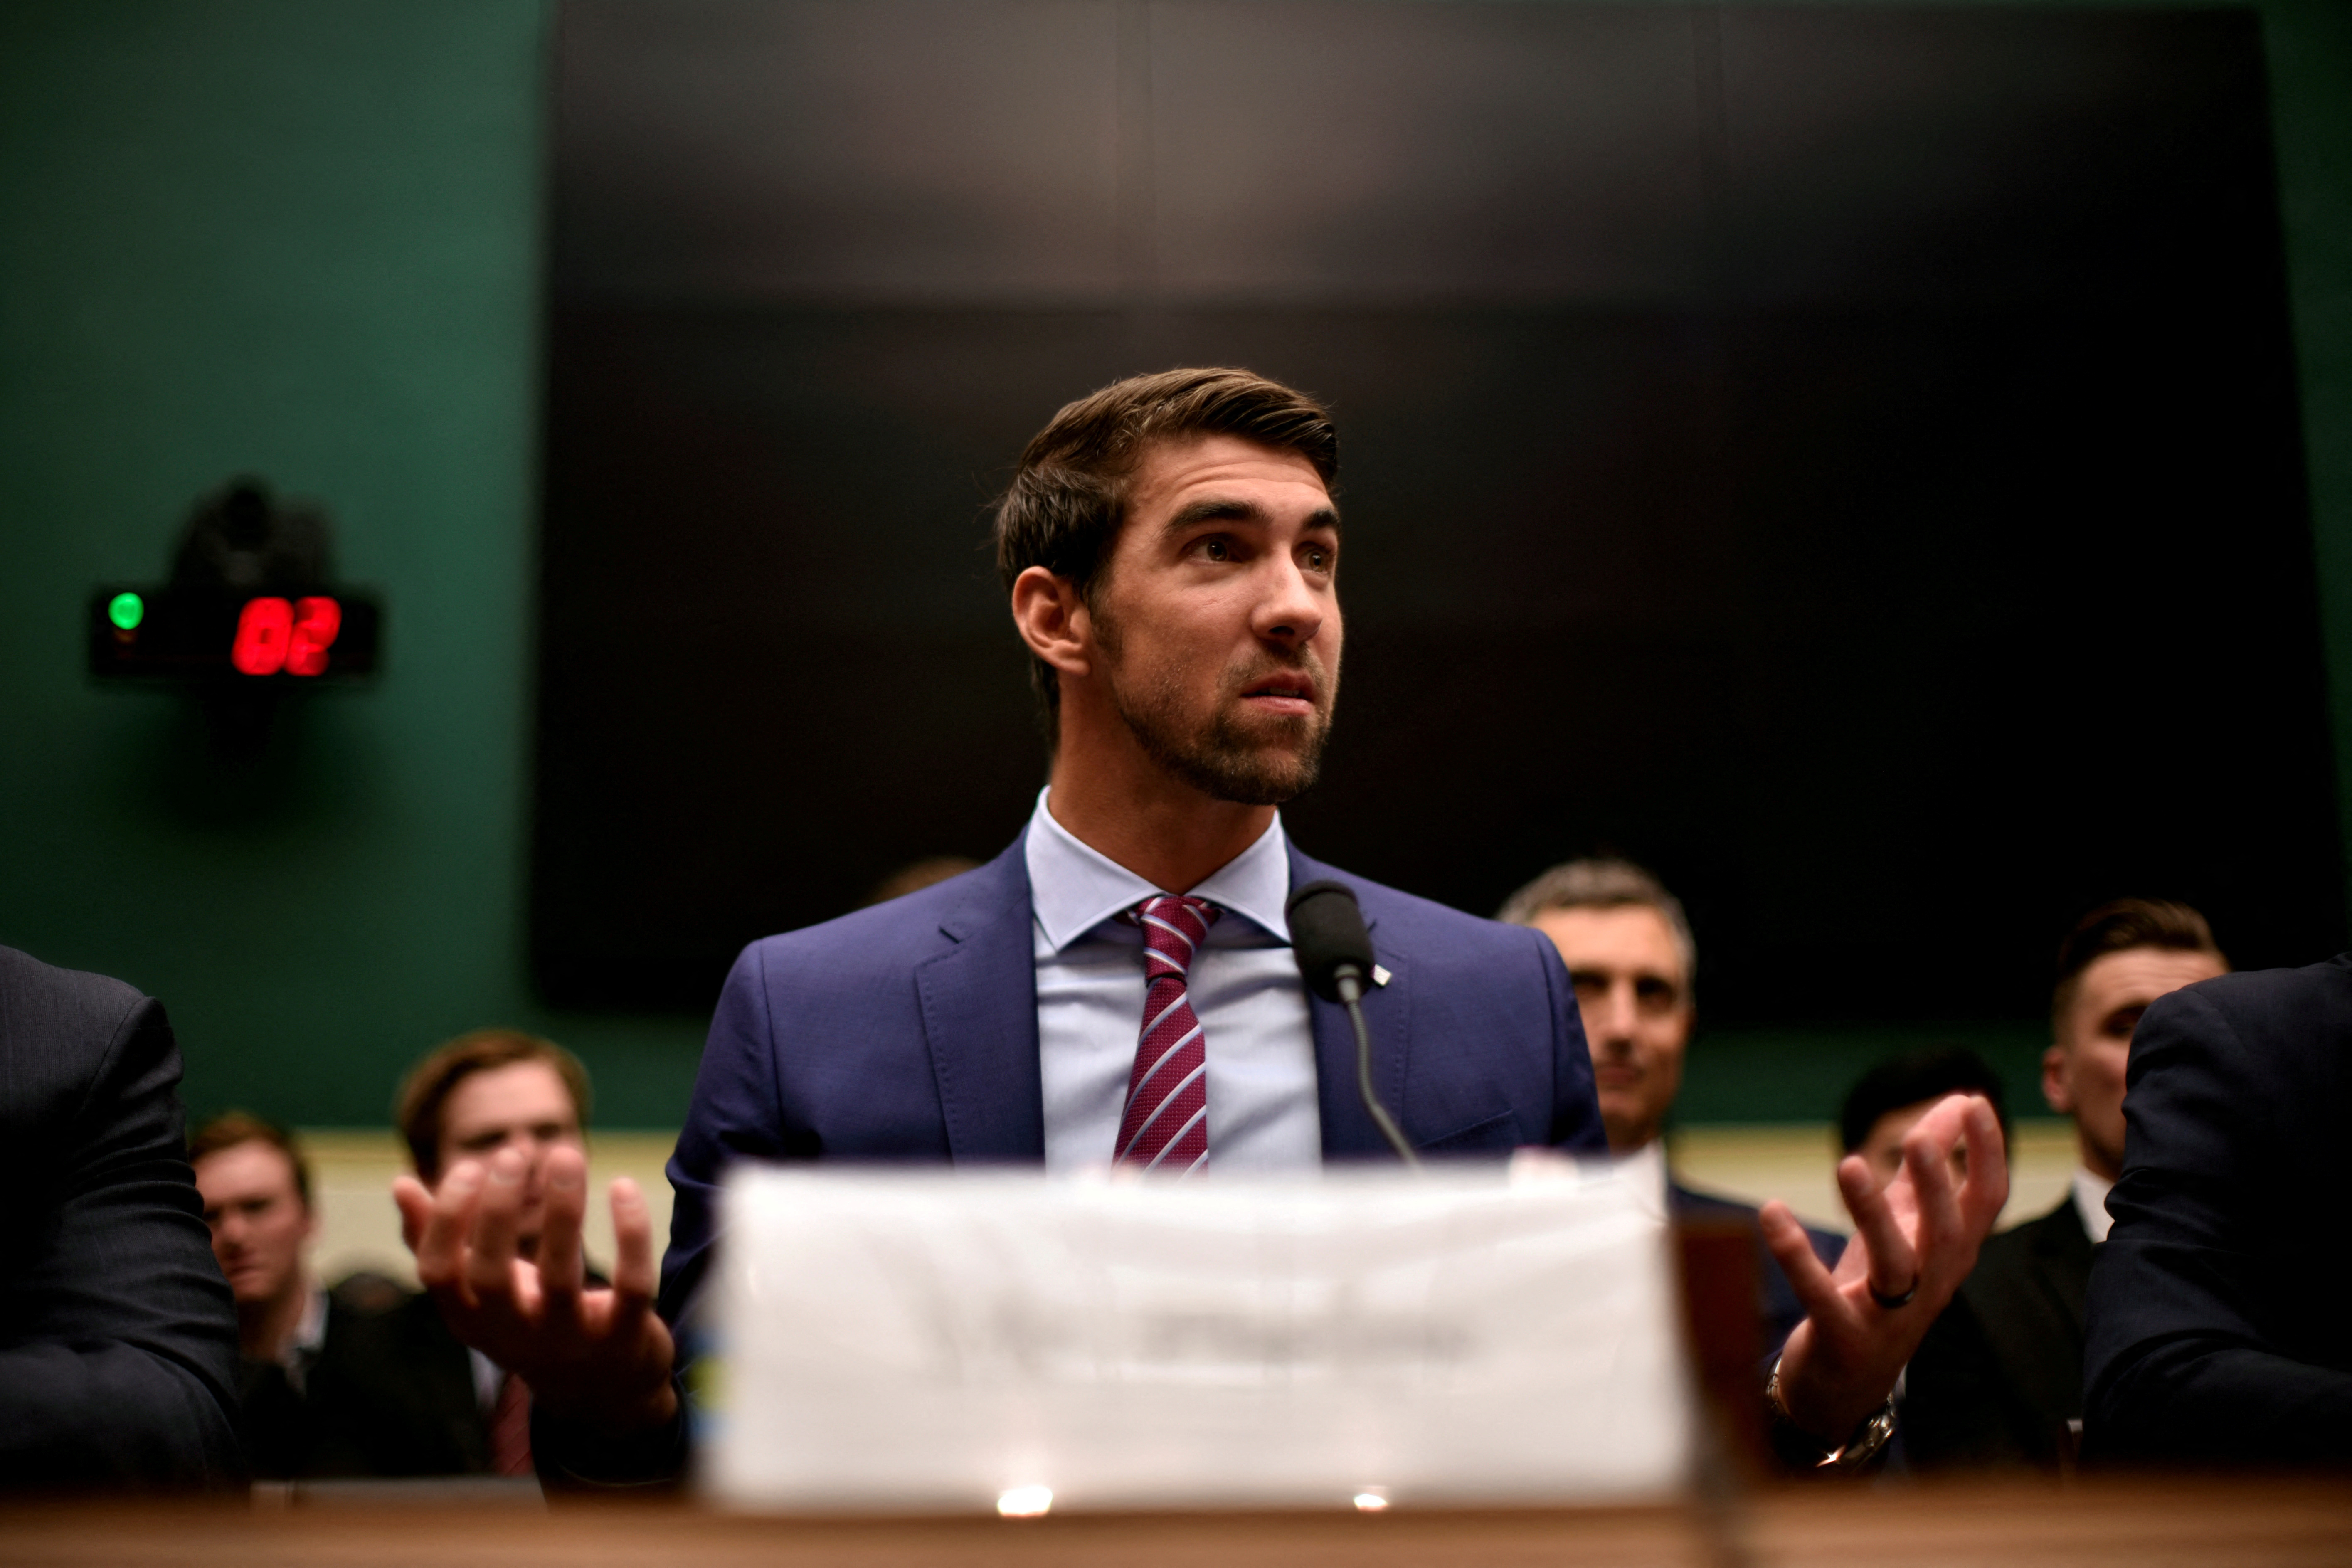 Olympic gold medalist Phelps testifies before the House Oversight and Investigations Subcommittee about anti-doping policy in international sport in Washington